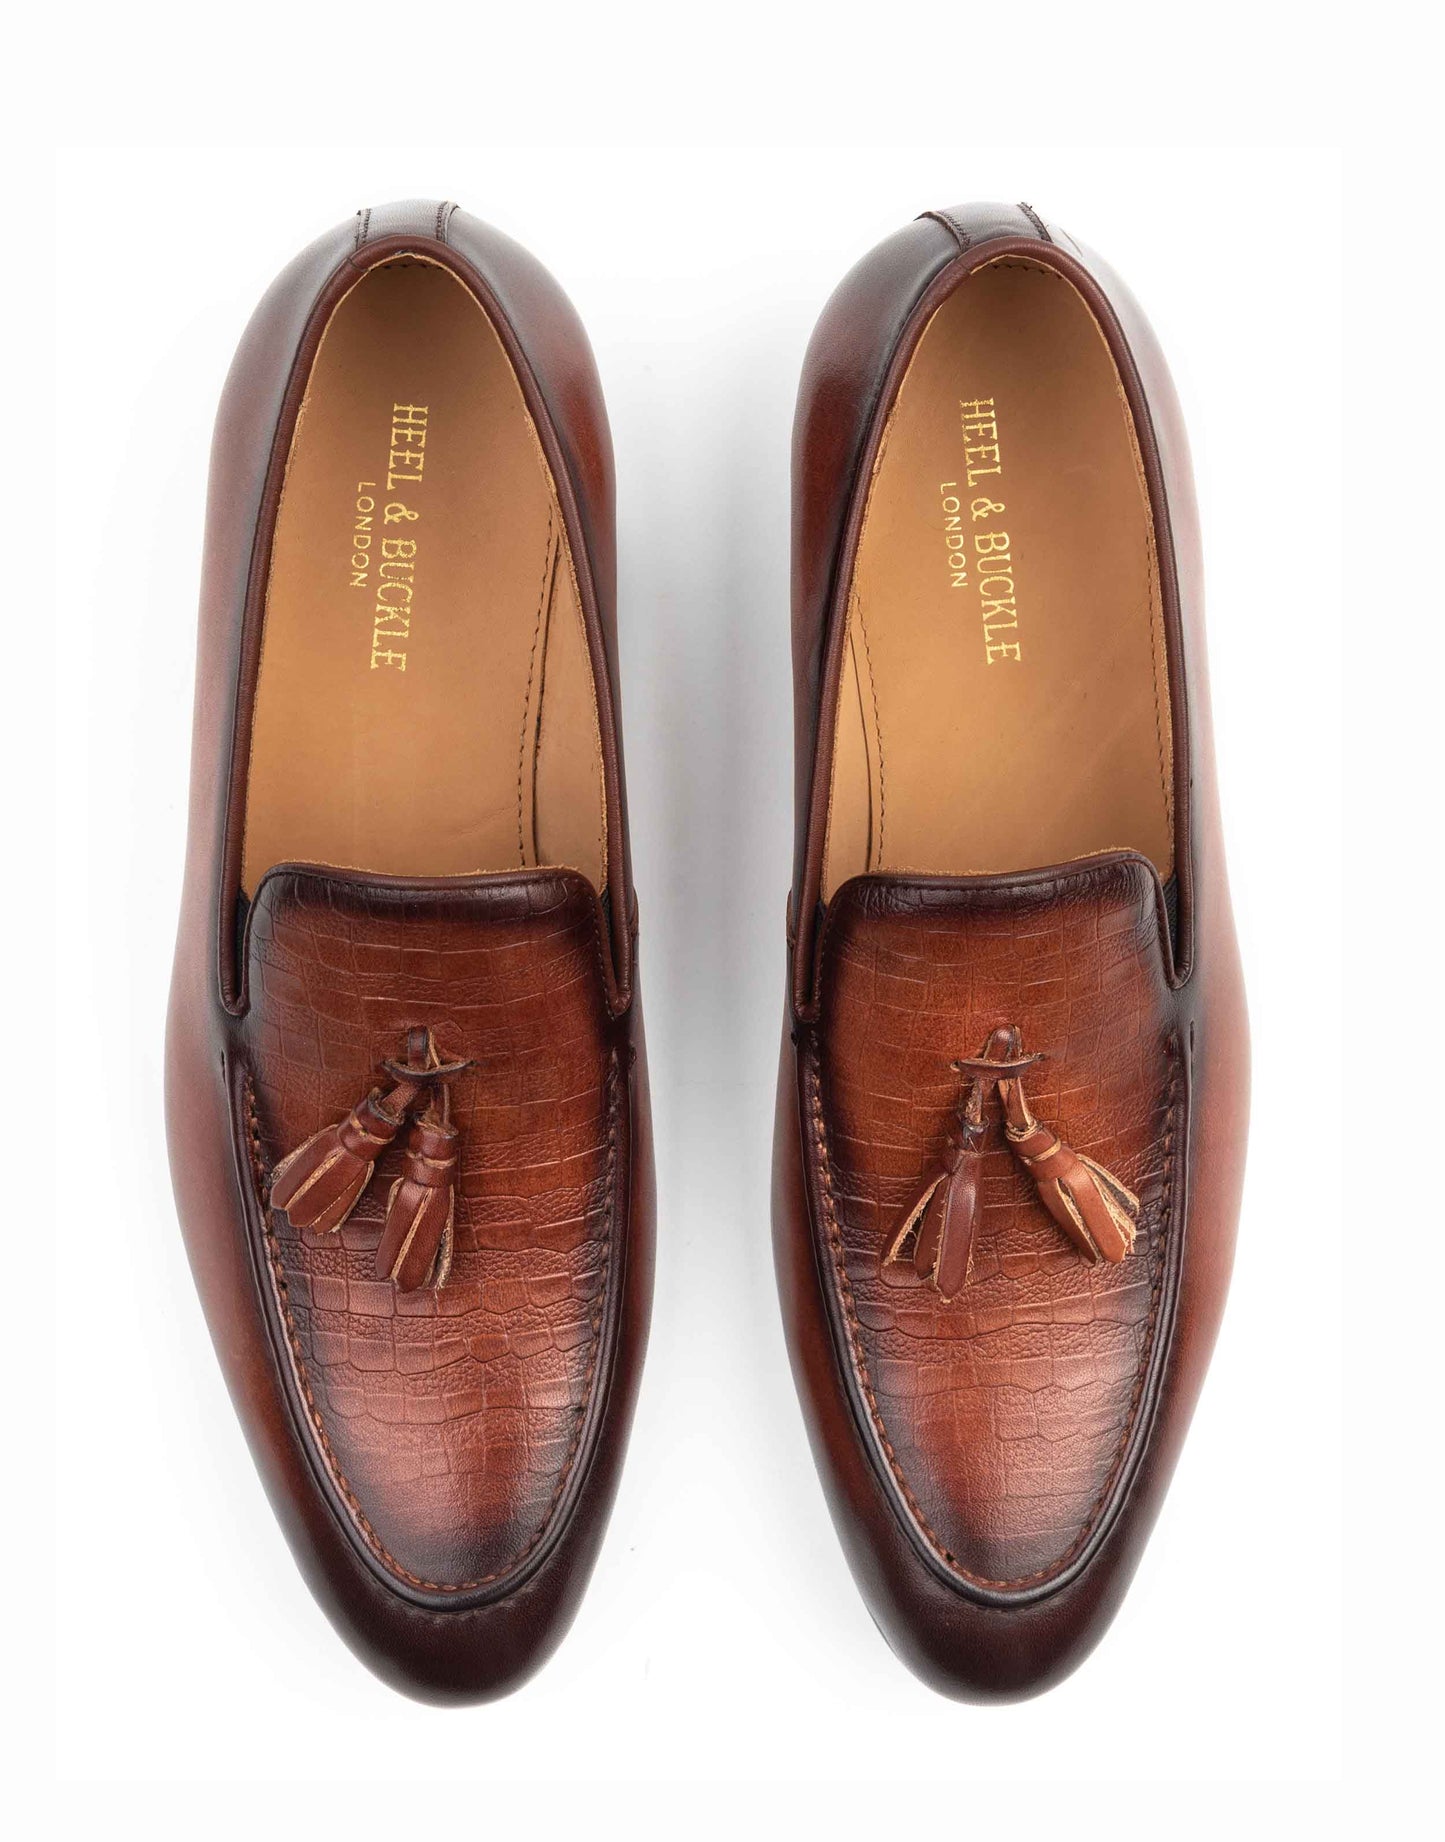 Cocoa Tassel Loafer-YD1818-4